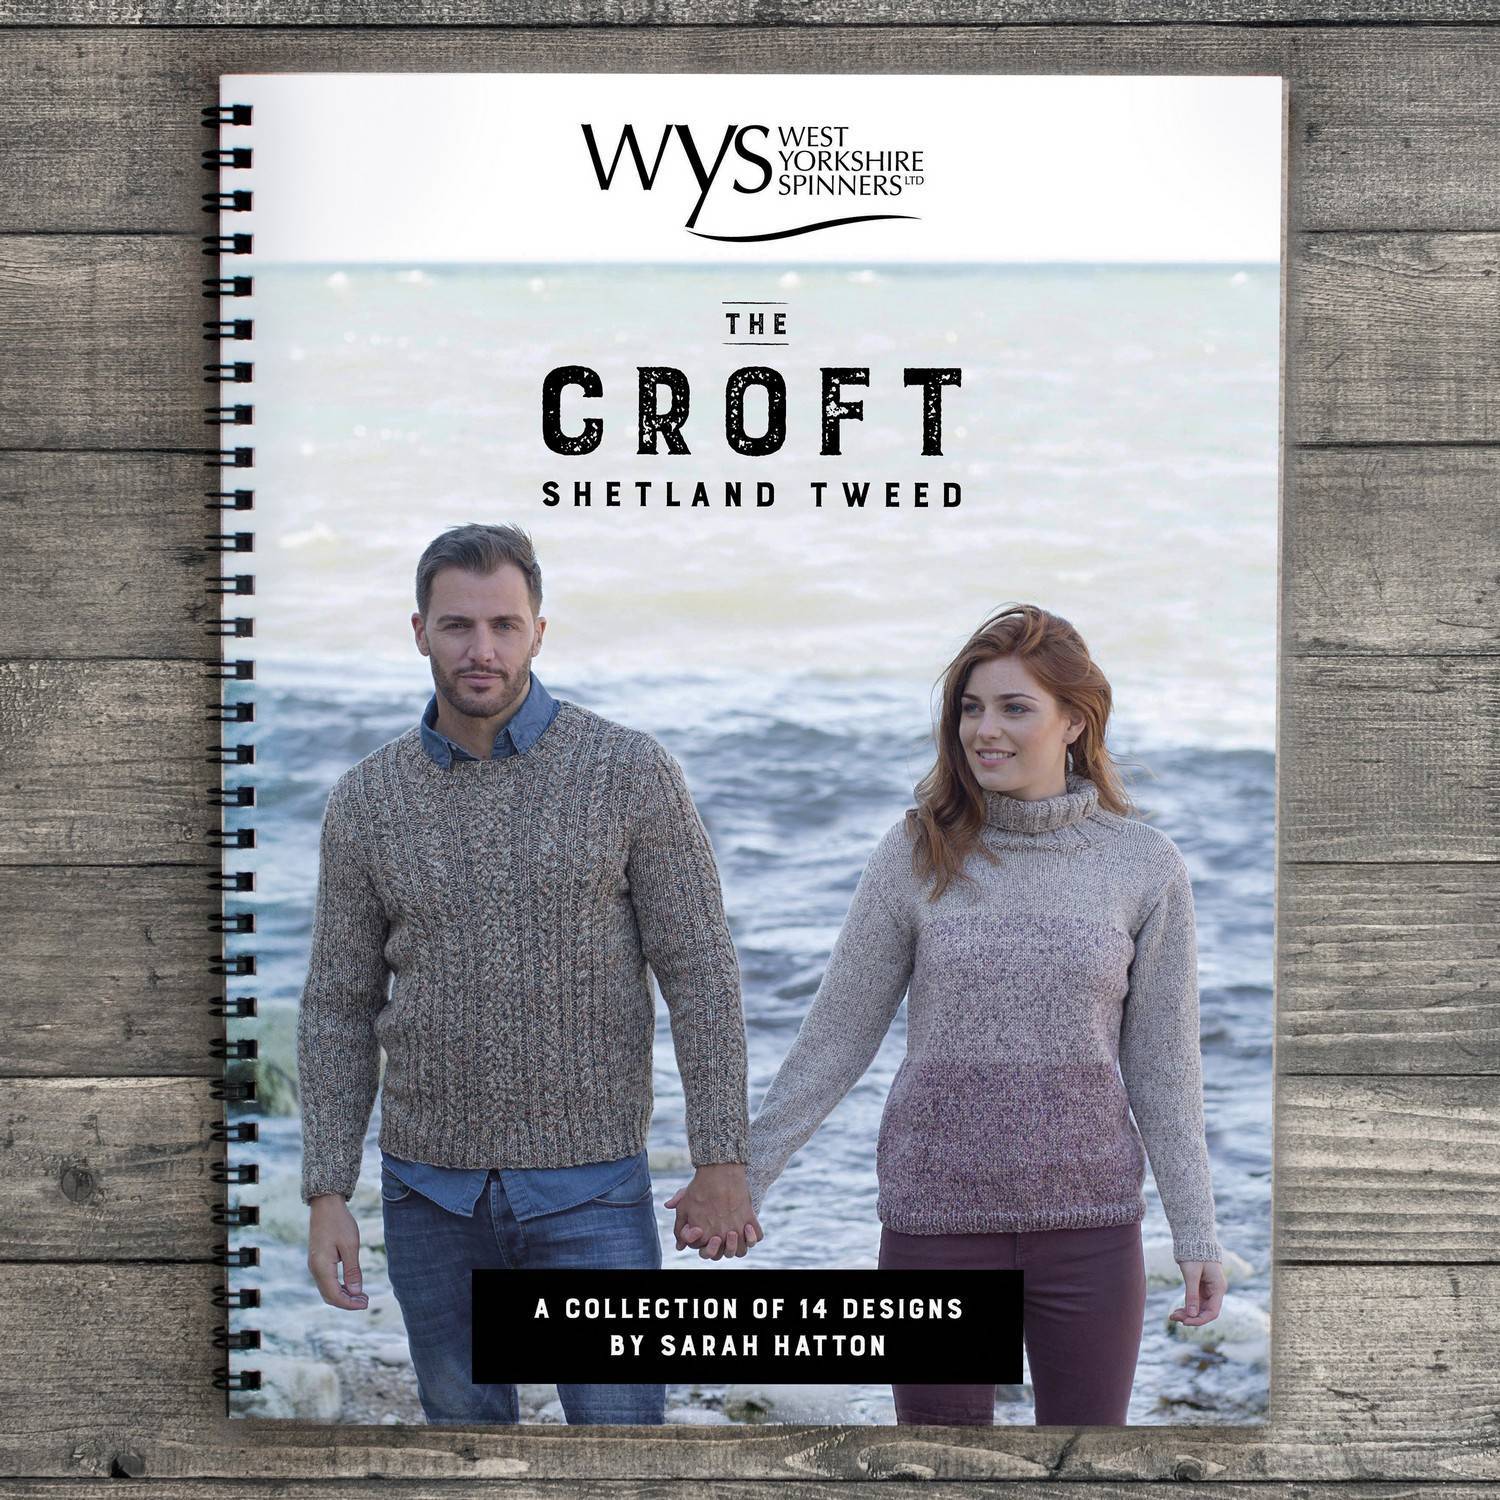 West Yorkshire Spinners The Croft Shetland Tweed - Book